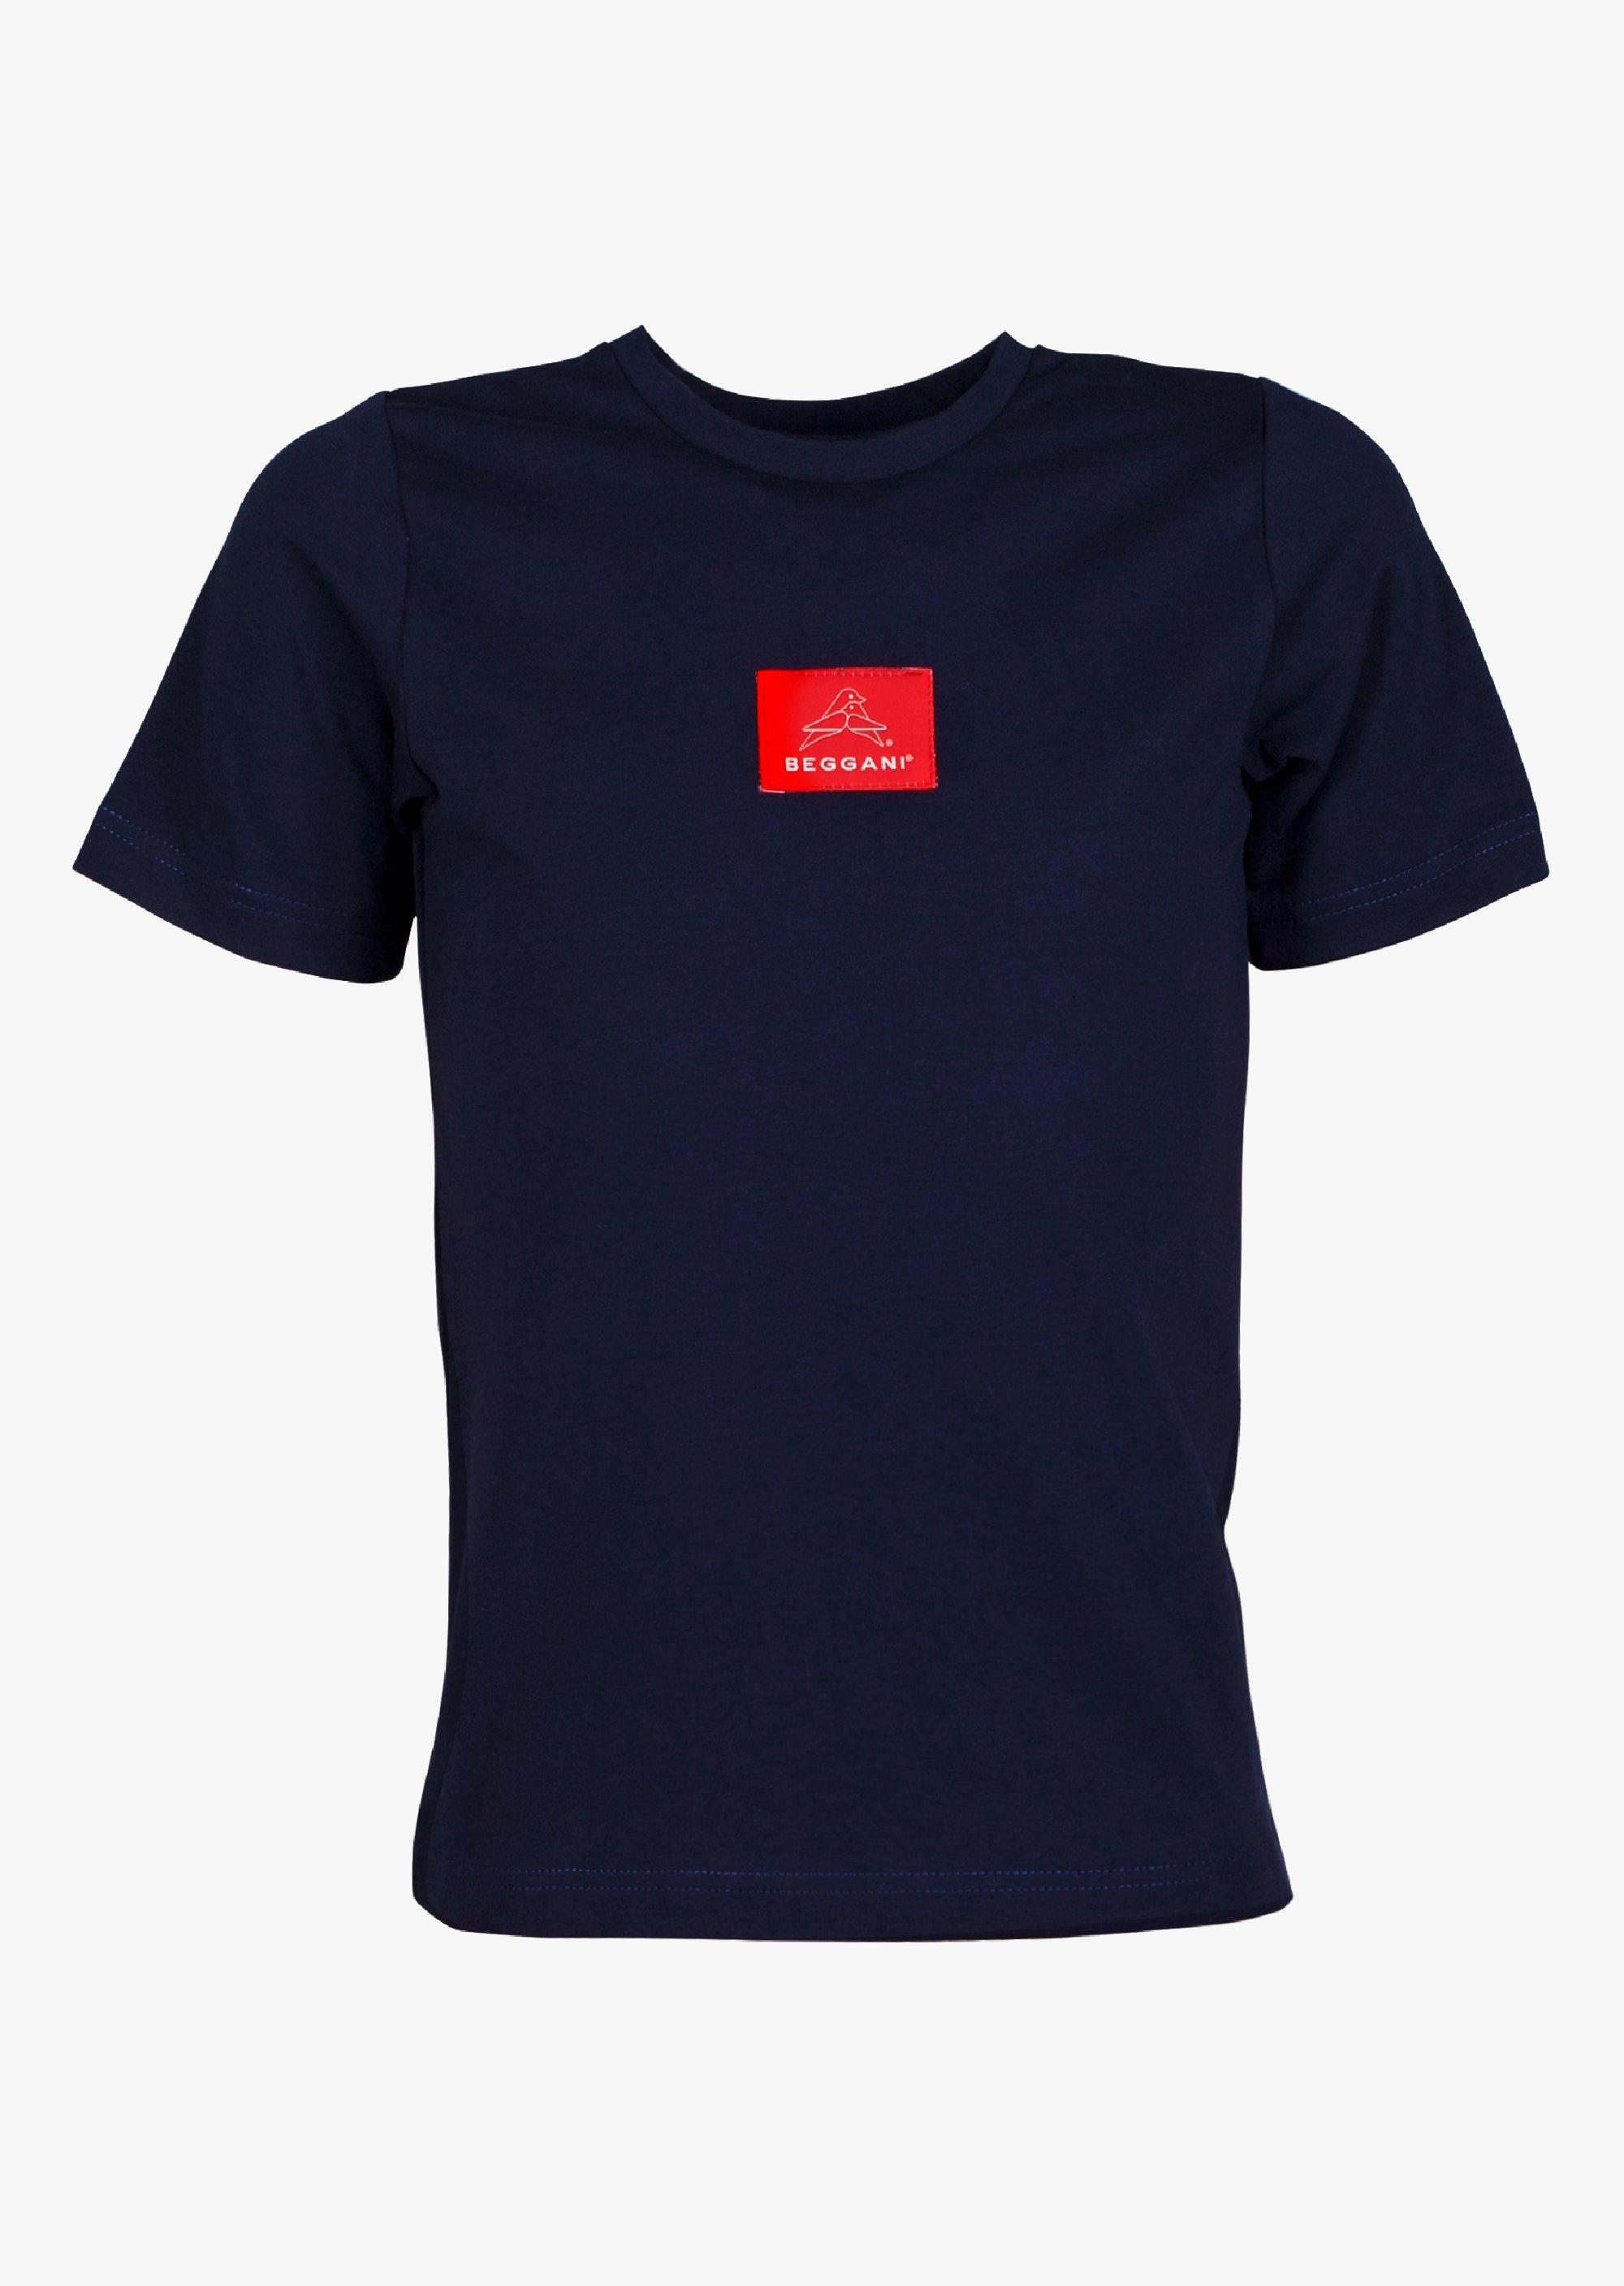 T-shirt of soft cotton with logo BEGGANI